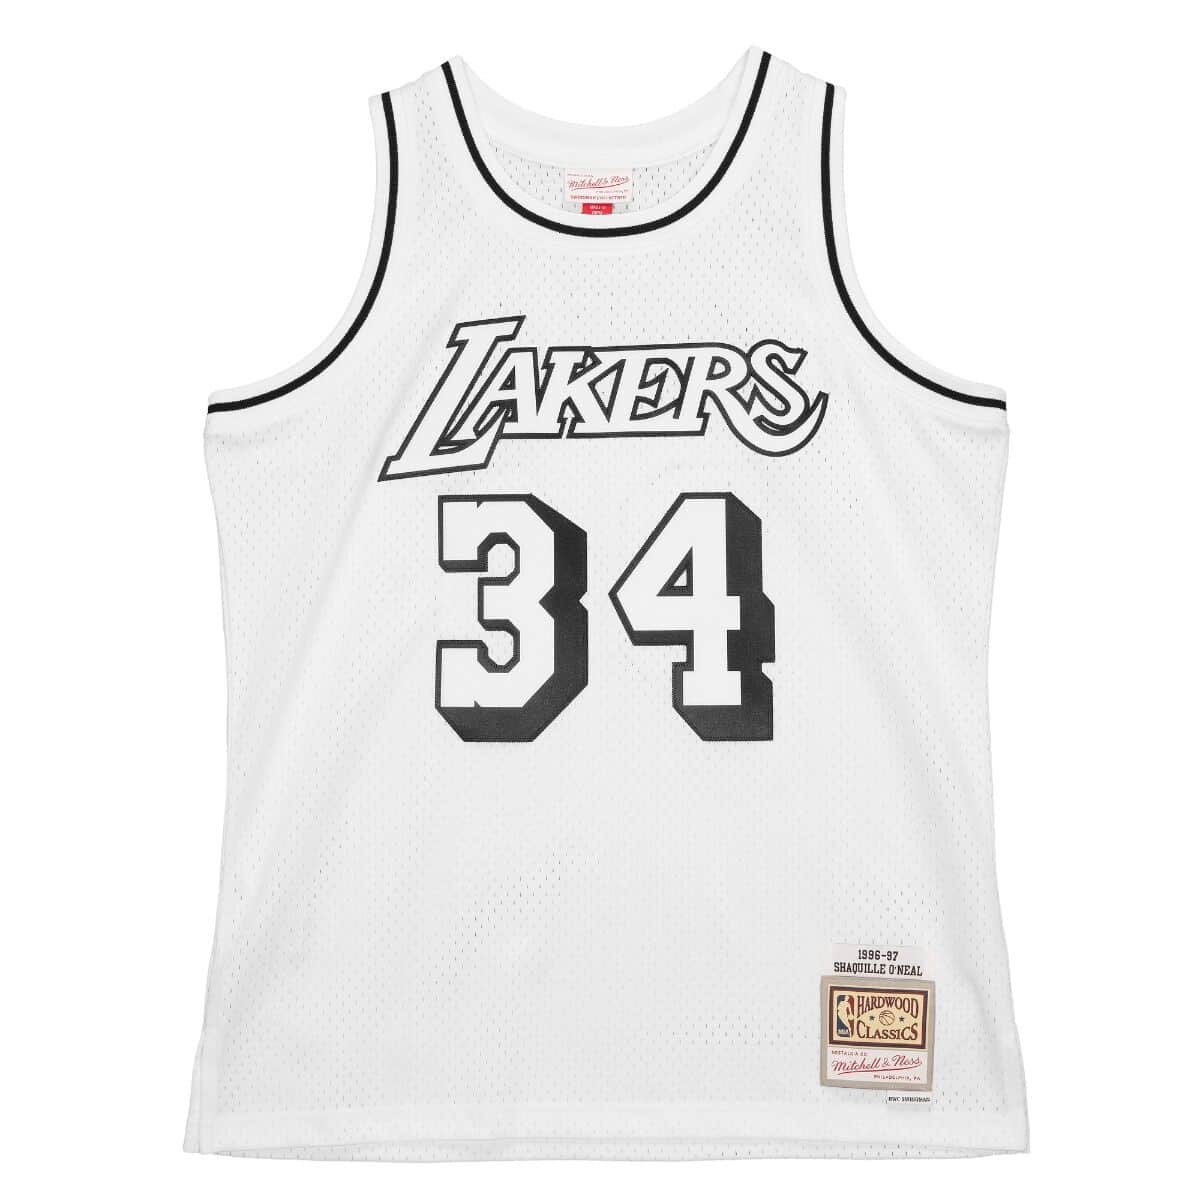 White Black Swingman Shaquille O'Neal Los Angeles Lakers 1996-97 Jersey